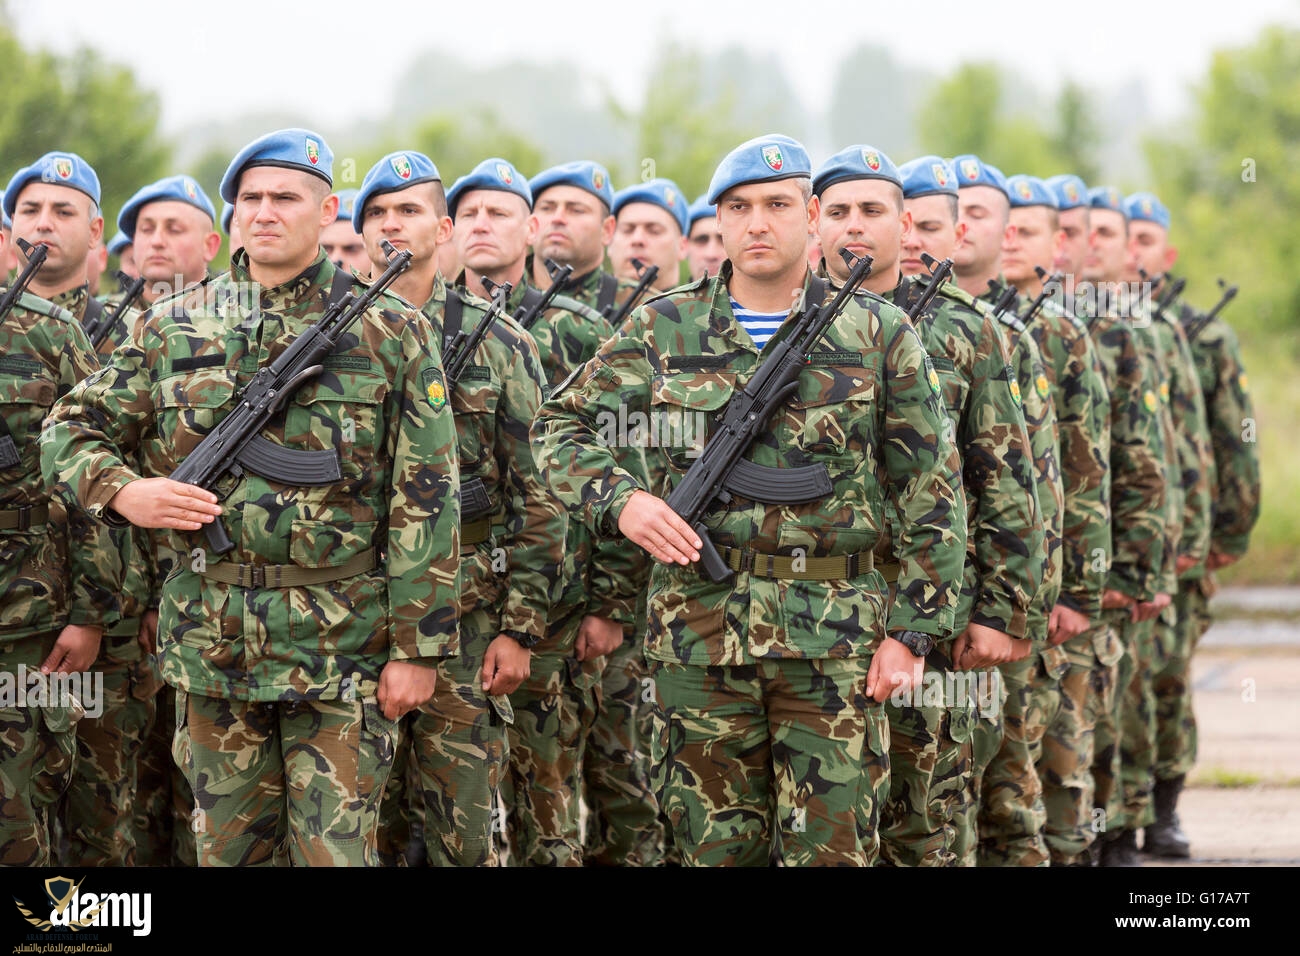 sofia-bulgaria-may-4-2016-soldiers-from-the-bulgarian-army-are-preparing-G17A7T.jpg